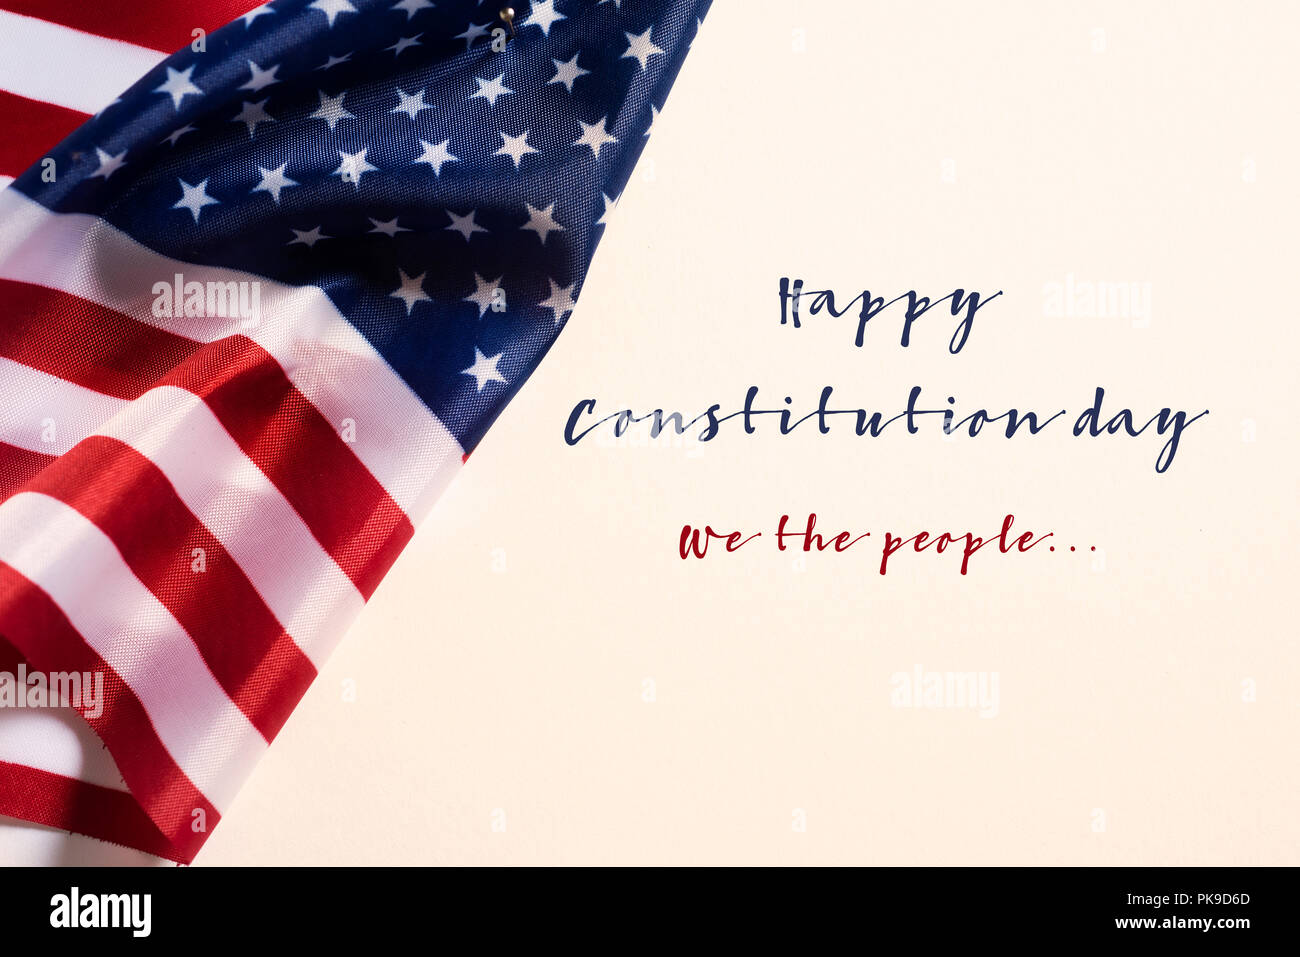 closeup of a flag of the United States and the text happy constitution day against an off-white background Stock Photo